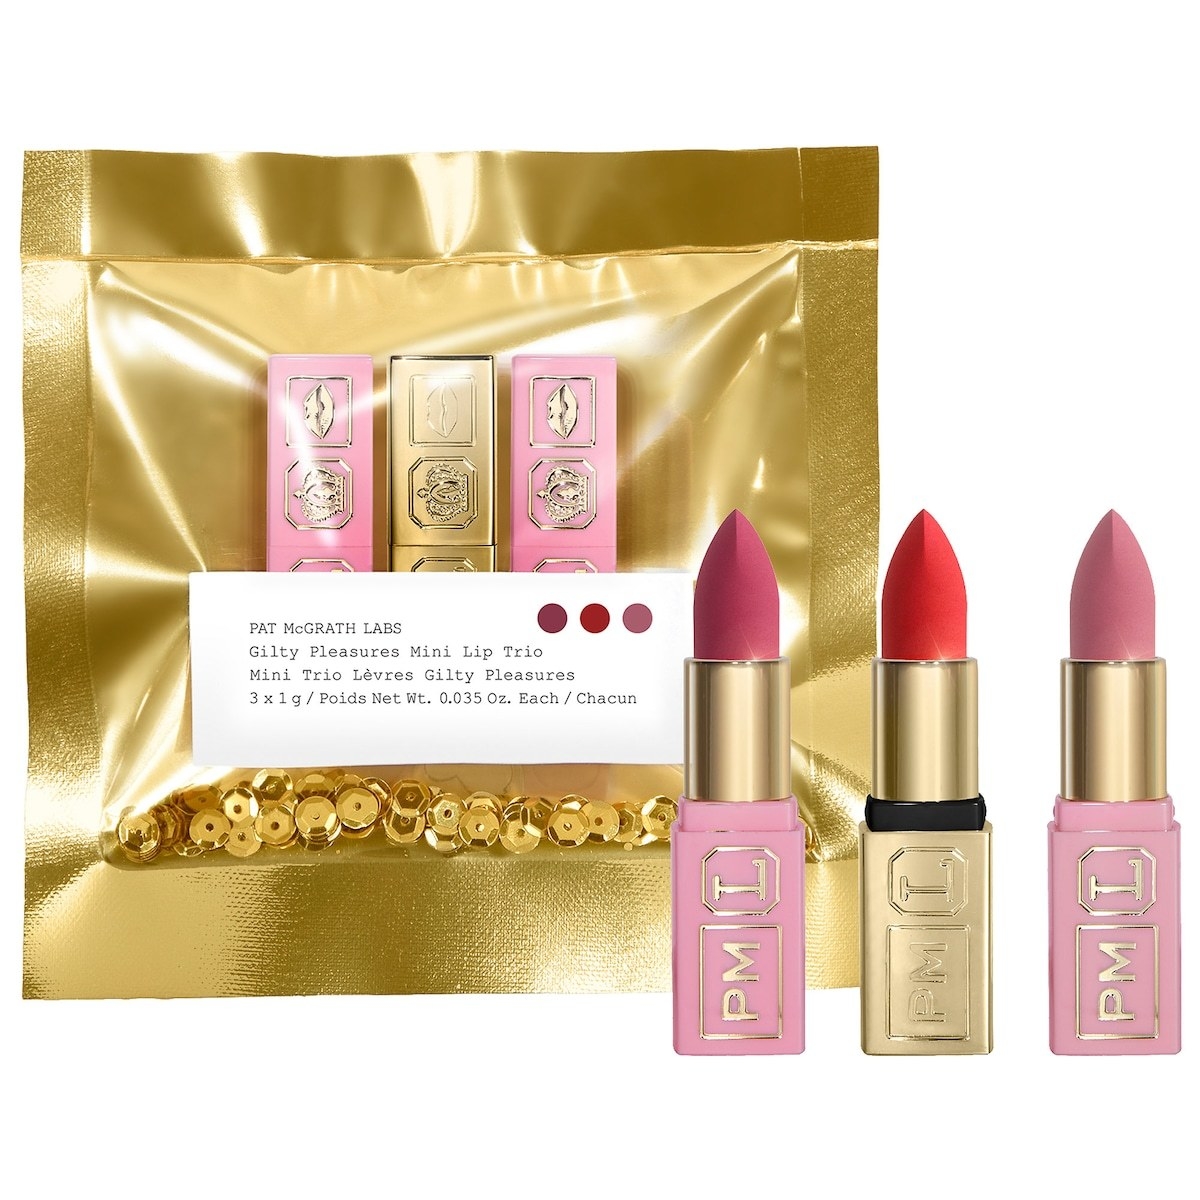 The three lipsticks in pink and gold tubes with the gift pouch, which is filled with gold sequins